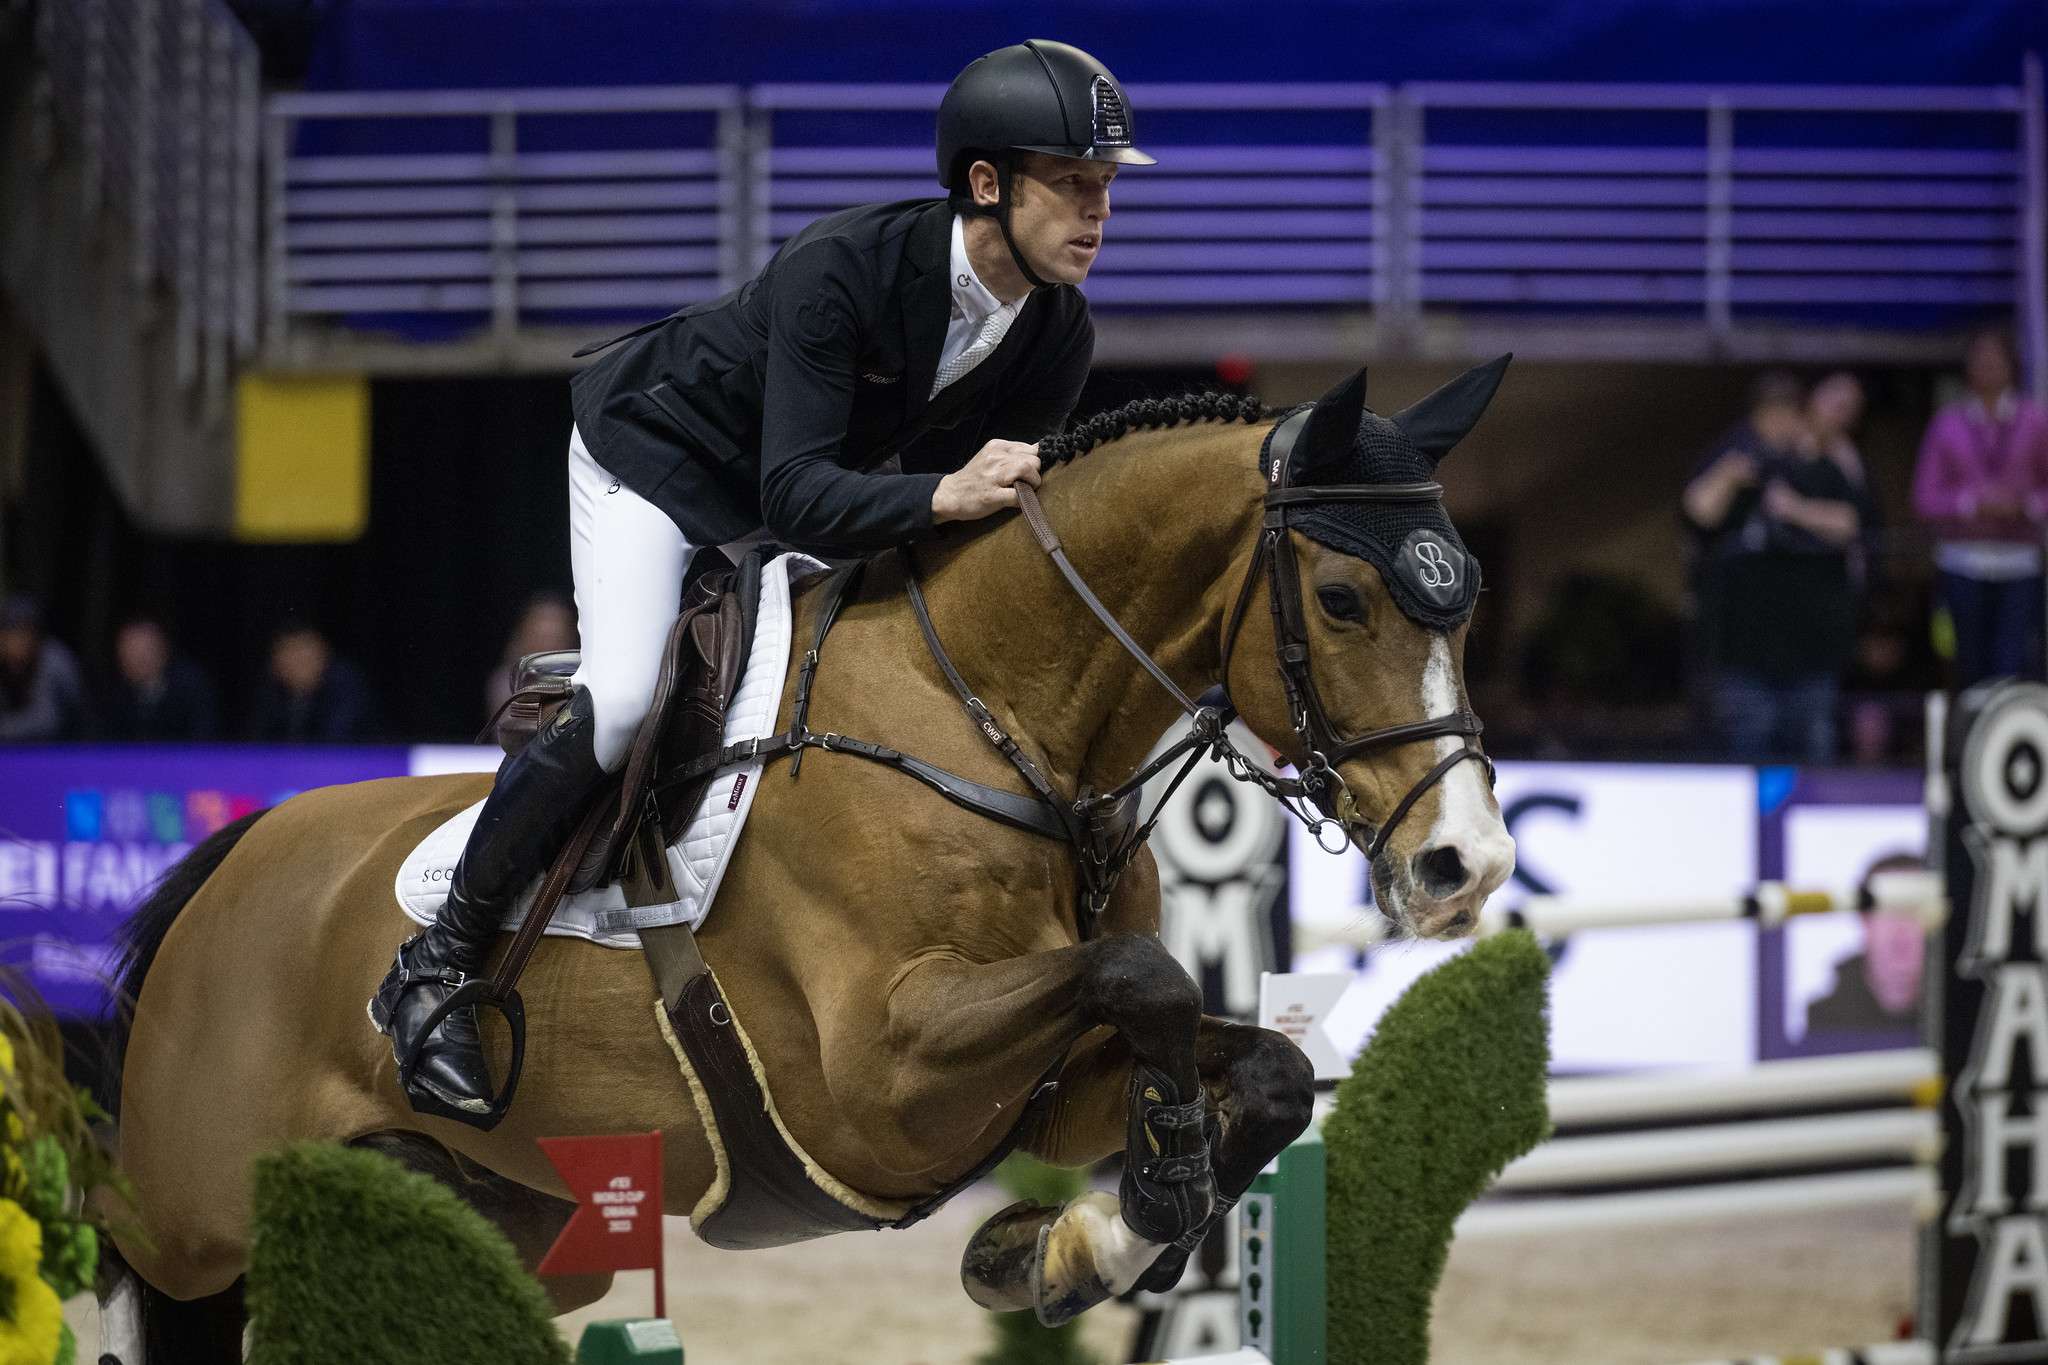 Scott Brash (GBR) riding Hello Jefferson - second place in the Longines FEI Jumping World Cup™ Final - Omaha 2023. Final I
 
Copyright ©FEI/Richard Juilliart